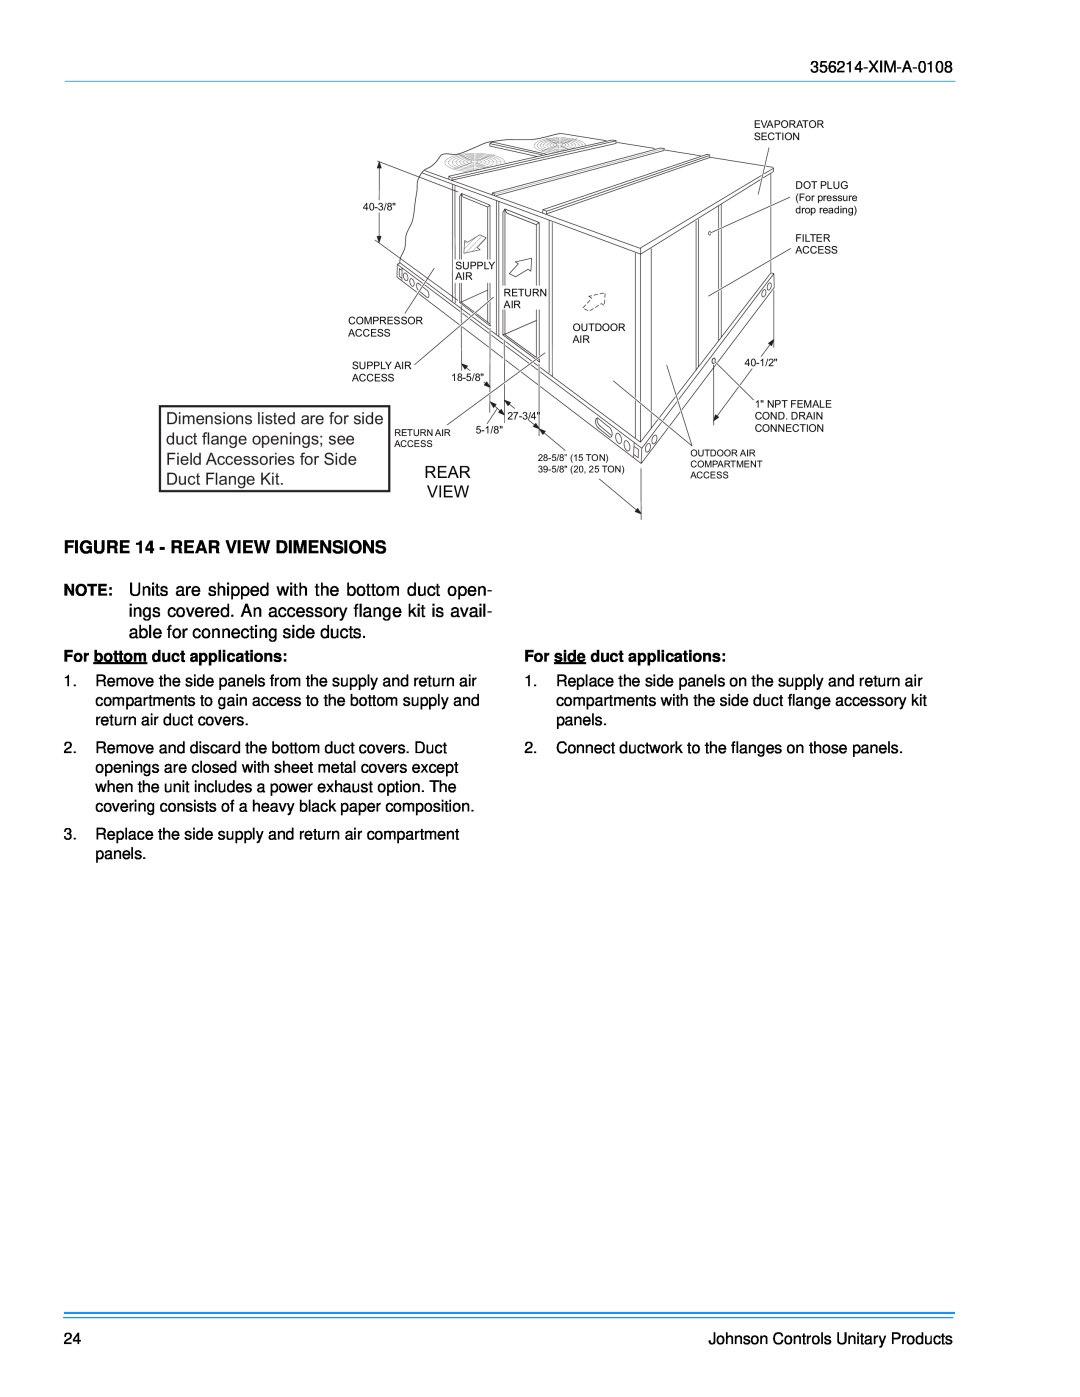 Sunlife Enterprises DM300 Rear View Dimensions, Dimensions listed are for side, duct flange openings see, Duct Flange Kit 